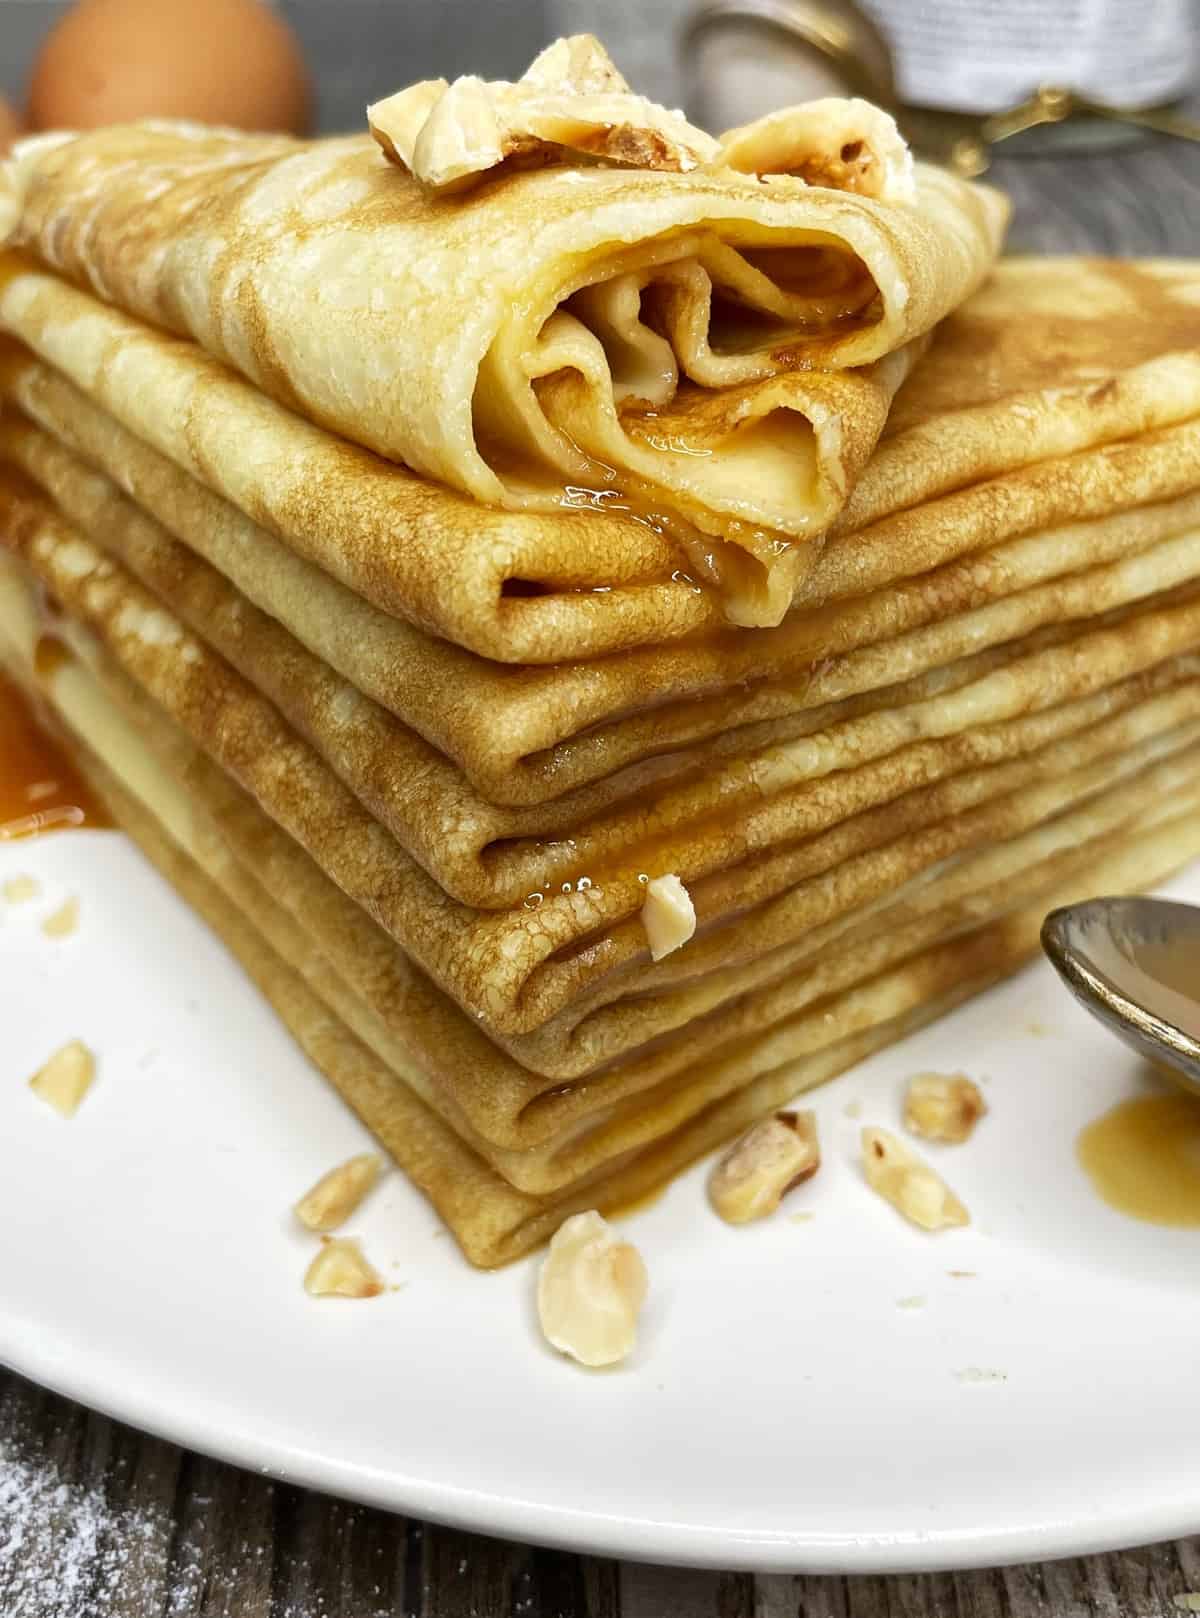 A crepe stack with poured caramel from the top crepe